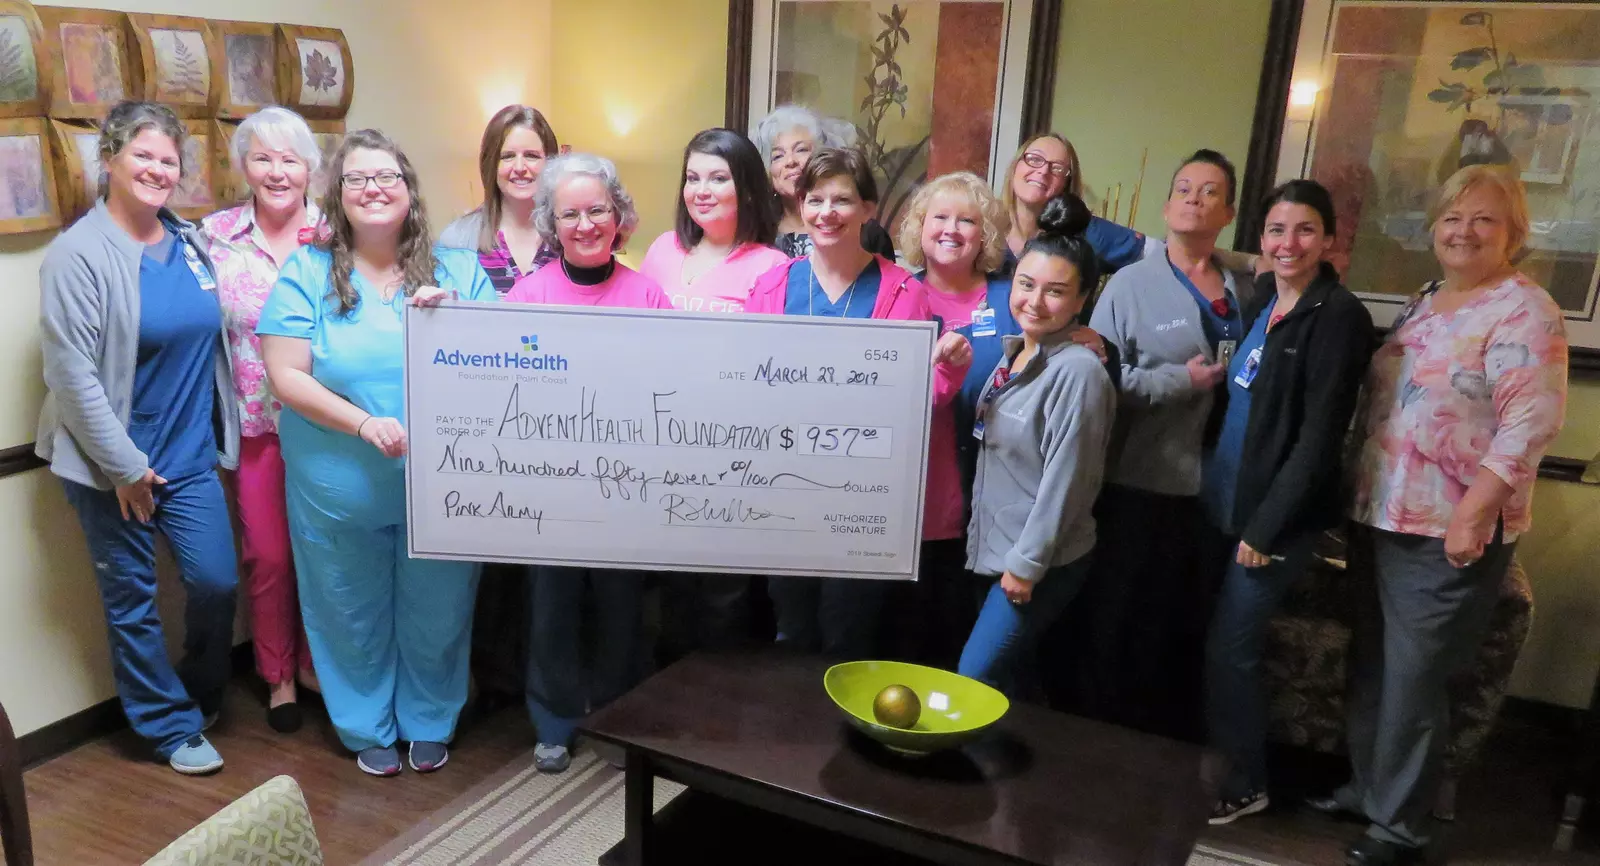 AdventHealth Palm Coast Staff Raise $1,000 to Help Breast Cancer Patients